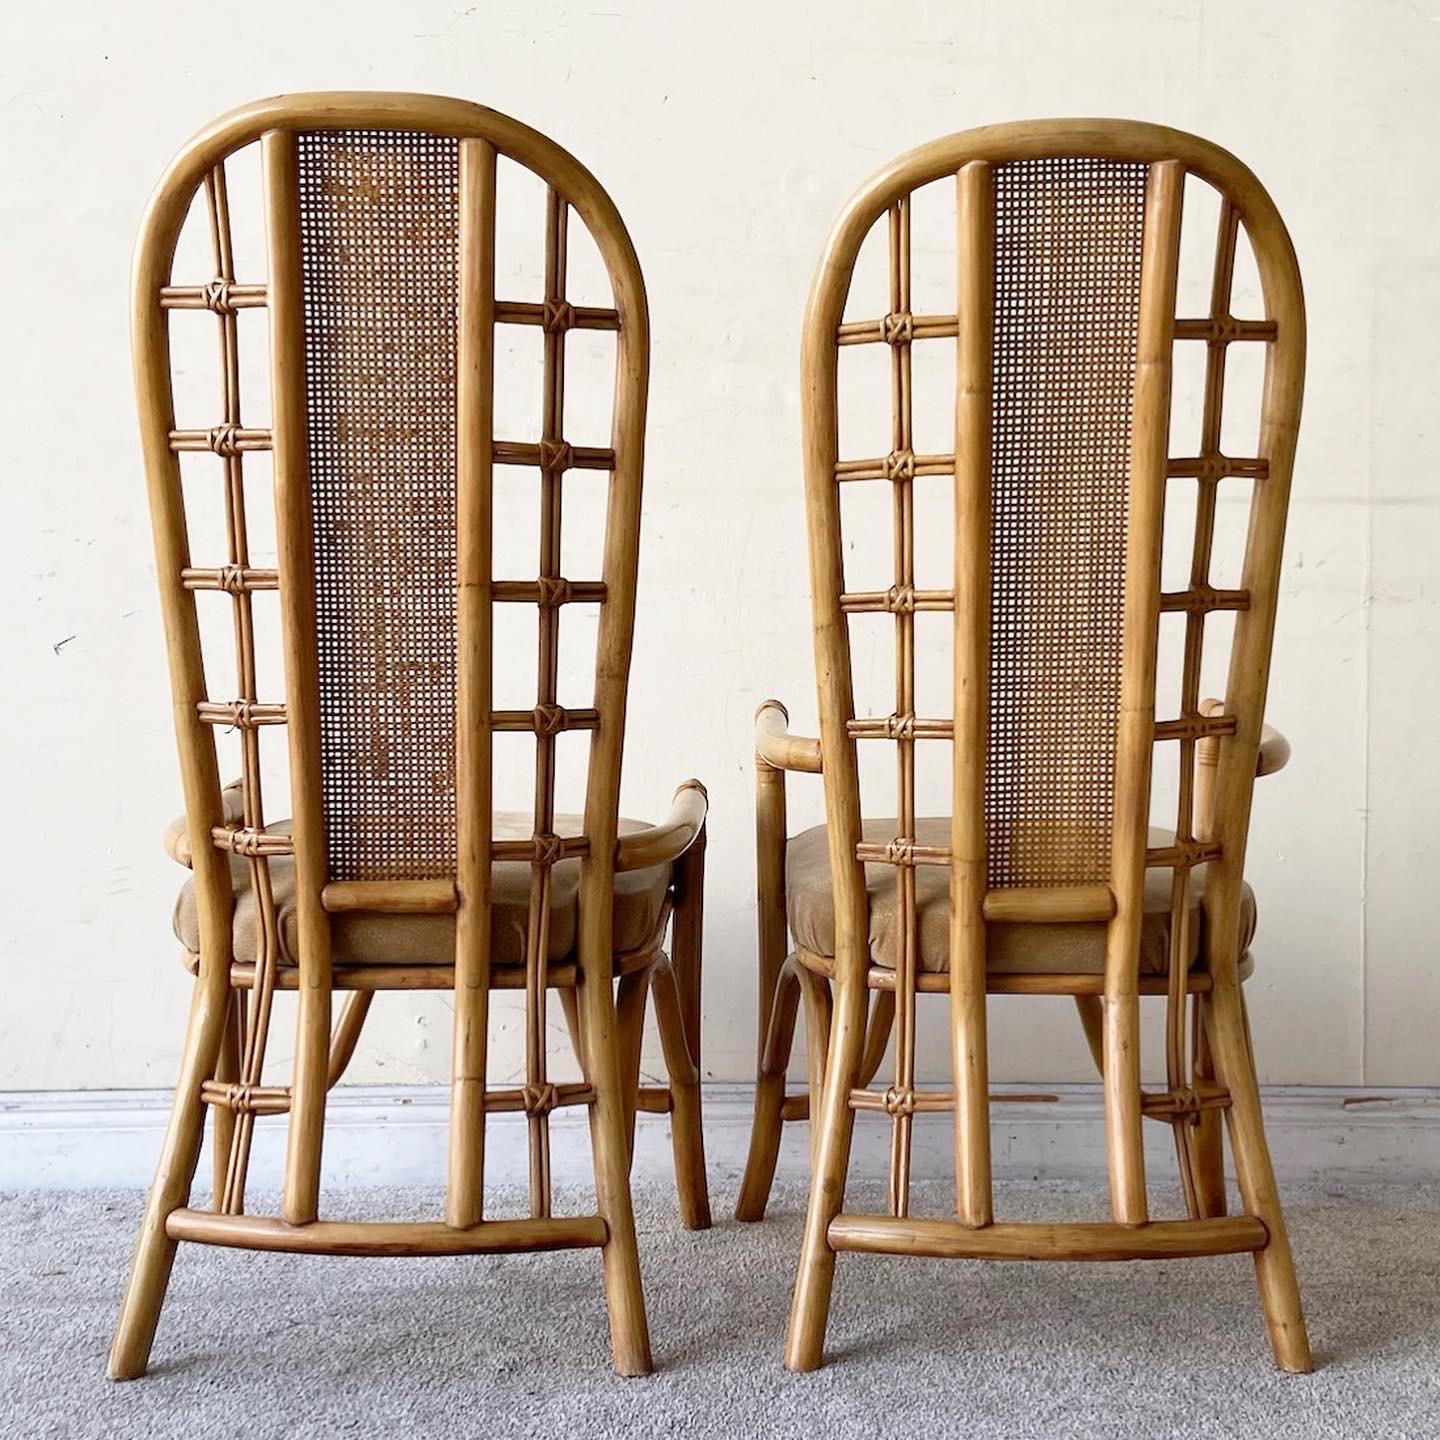 Late 20th Century Bohemian Bamboo Rattan and Cane Dining Chairs, 4 Chairs